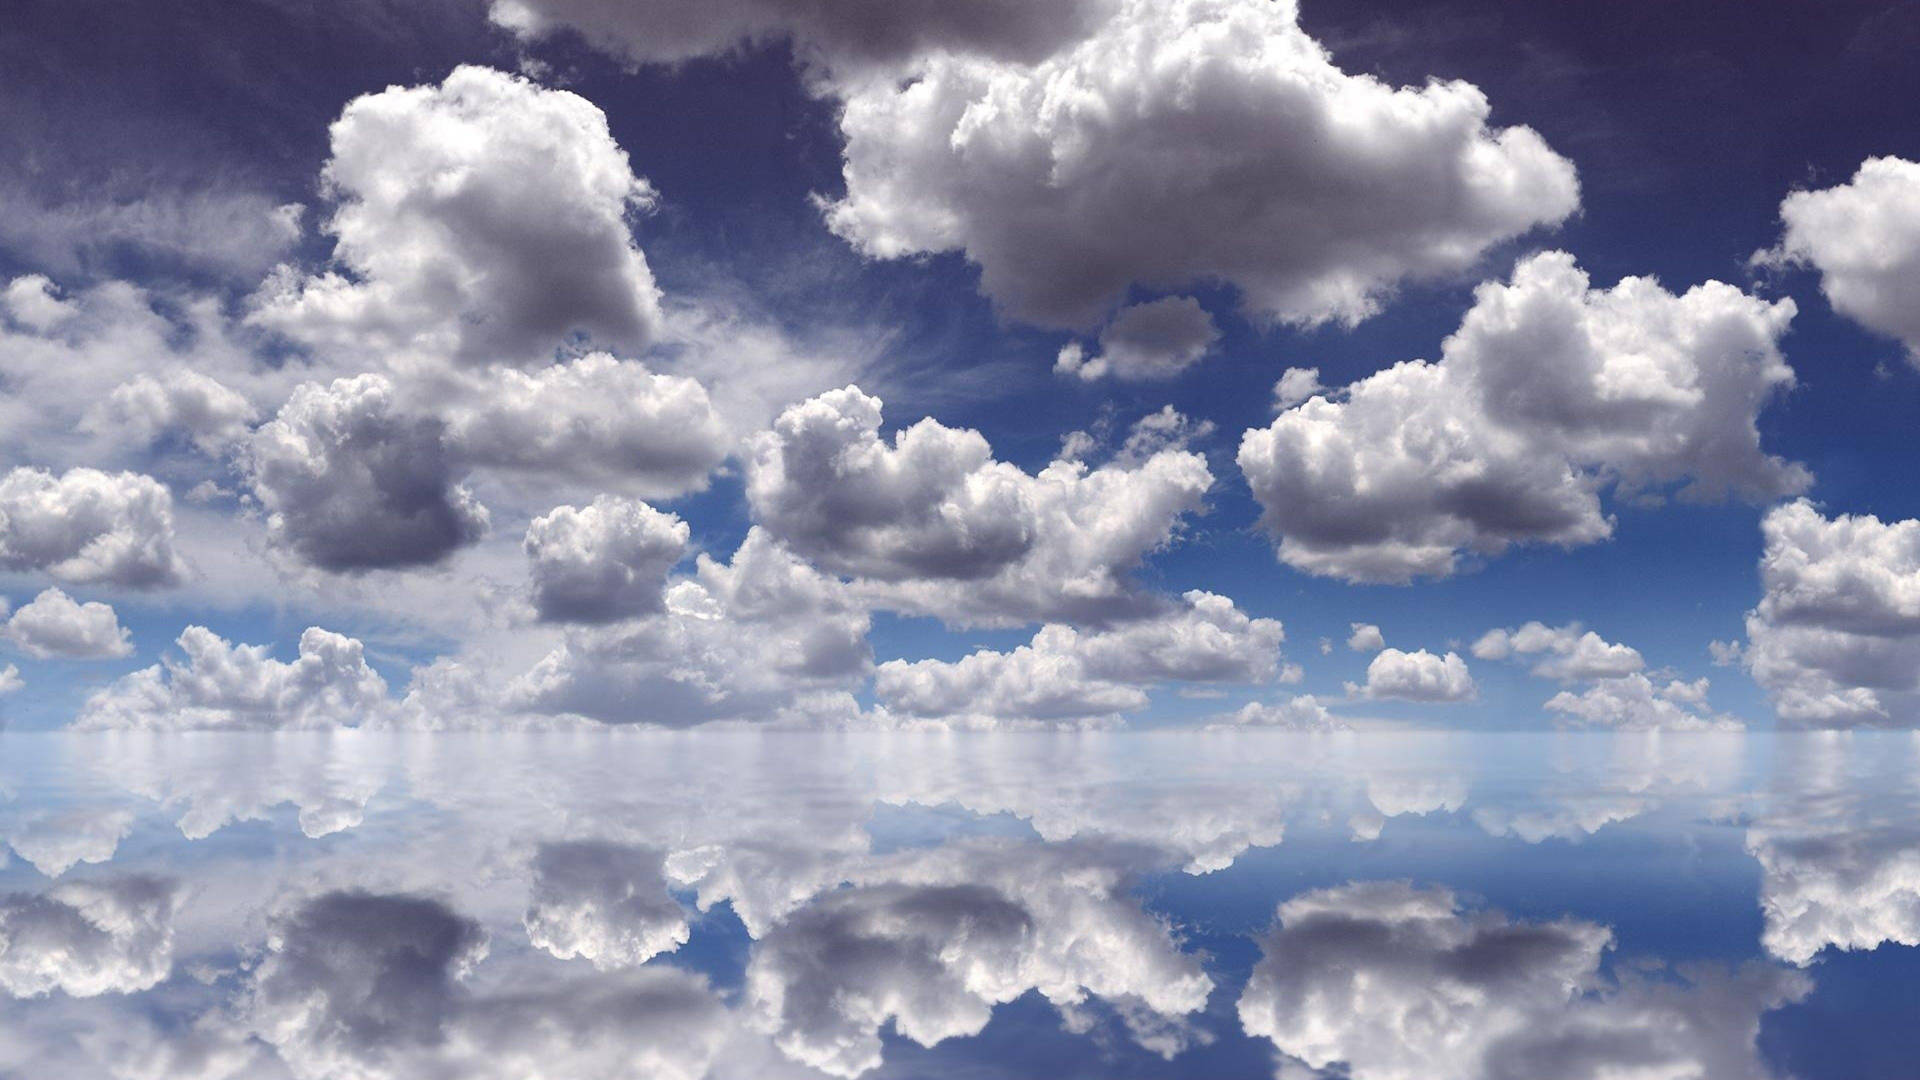 Reflection Of Blue Aesthetic Cloud Wallpaper